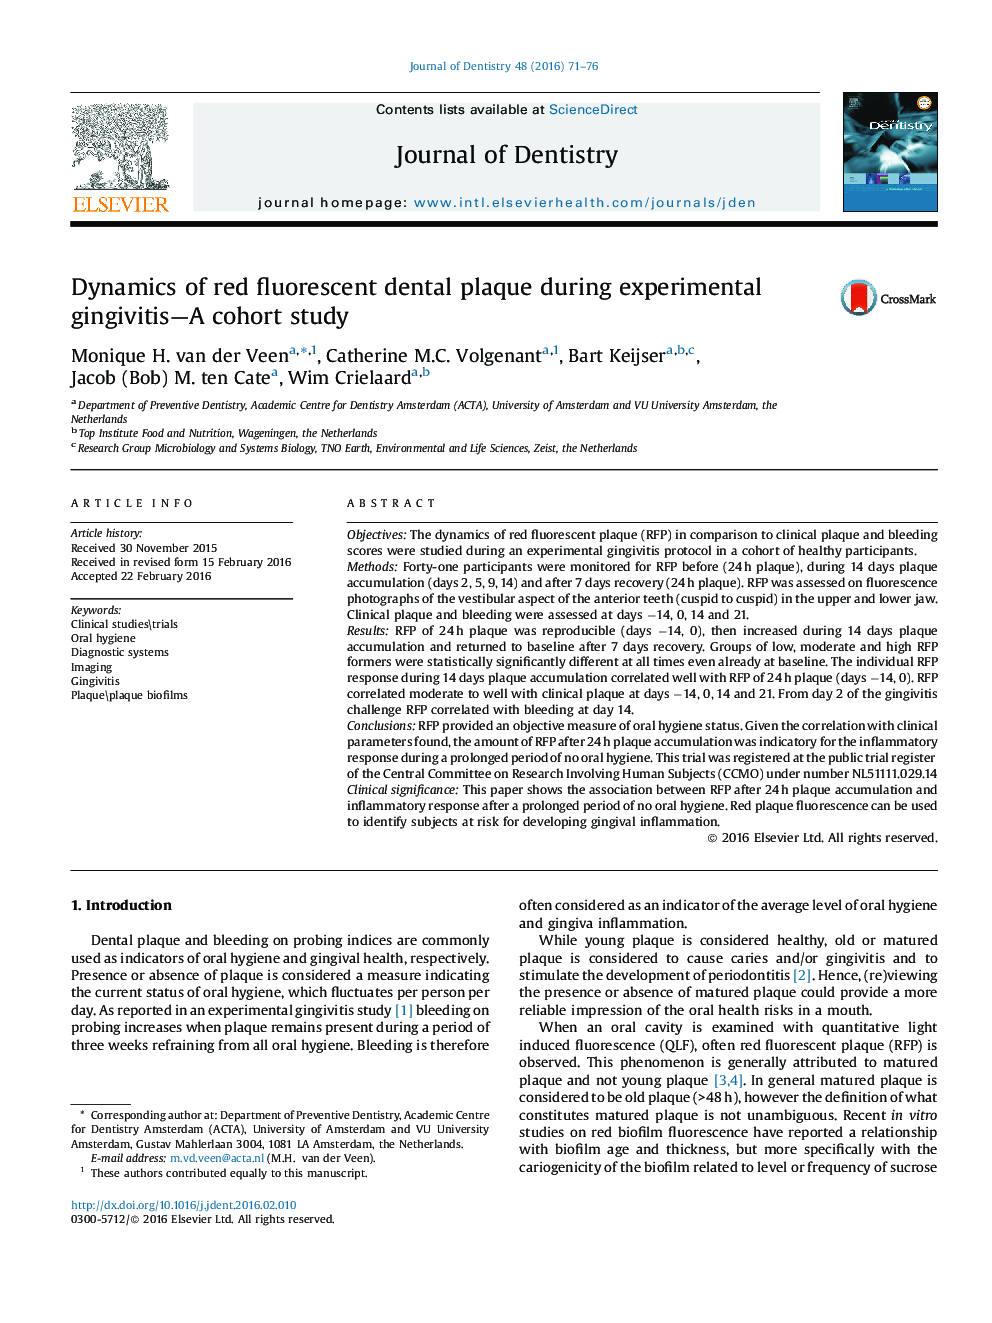 Dynamics of red fluorescent dental plaque during experimental gingivitis—A cohort study